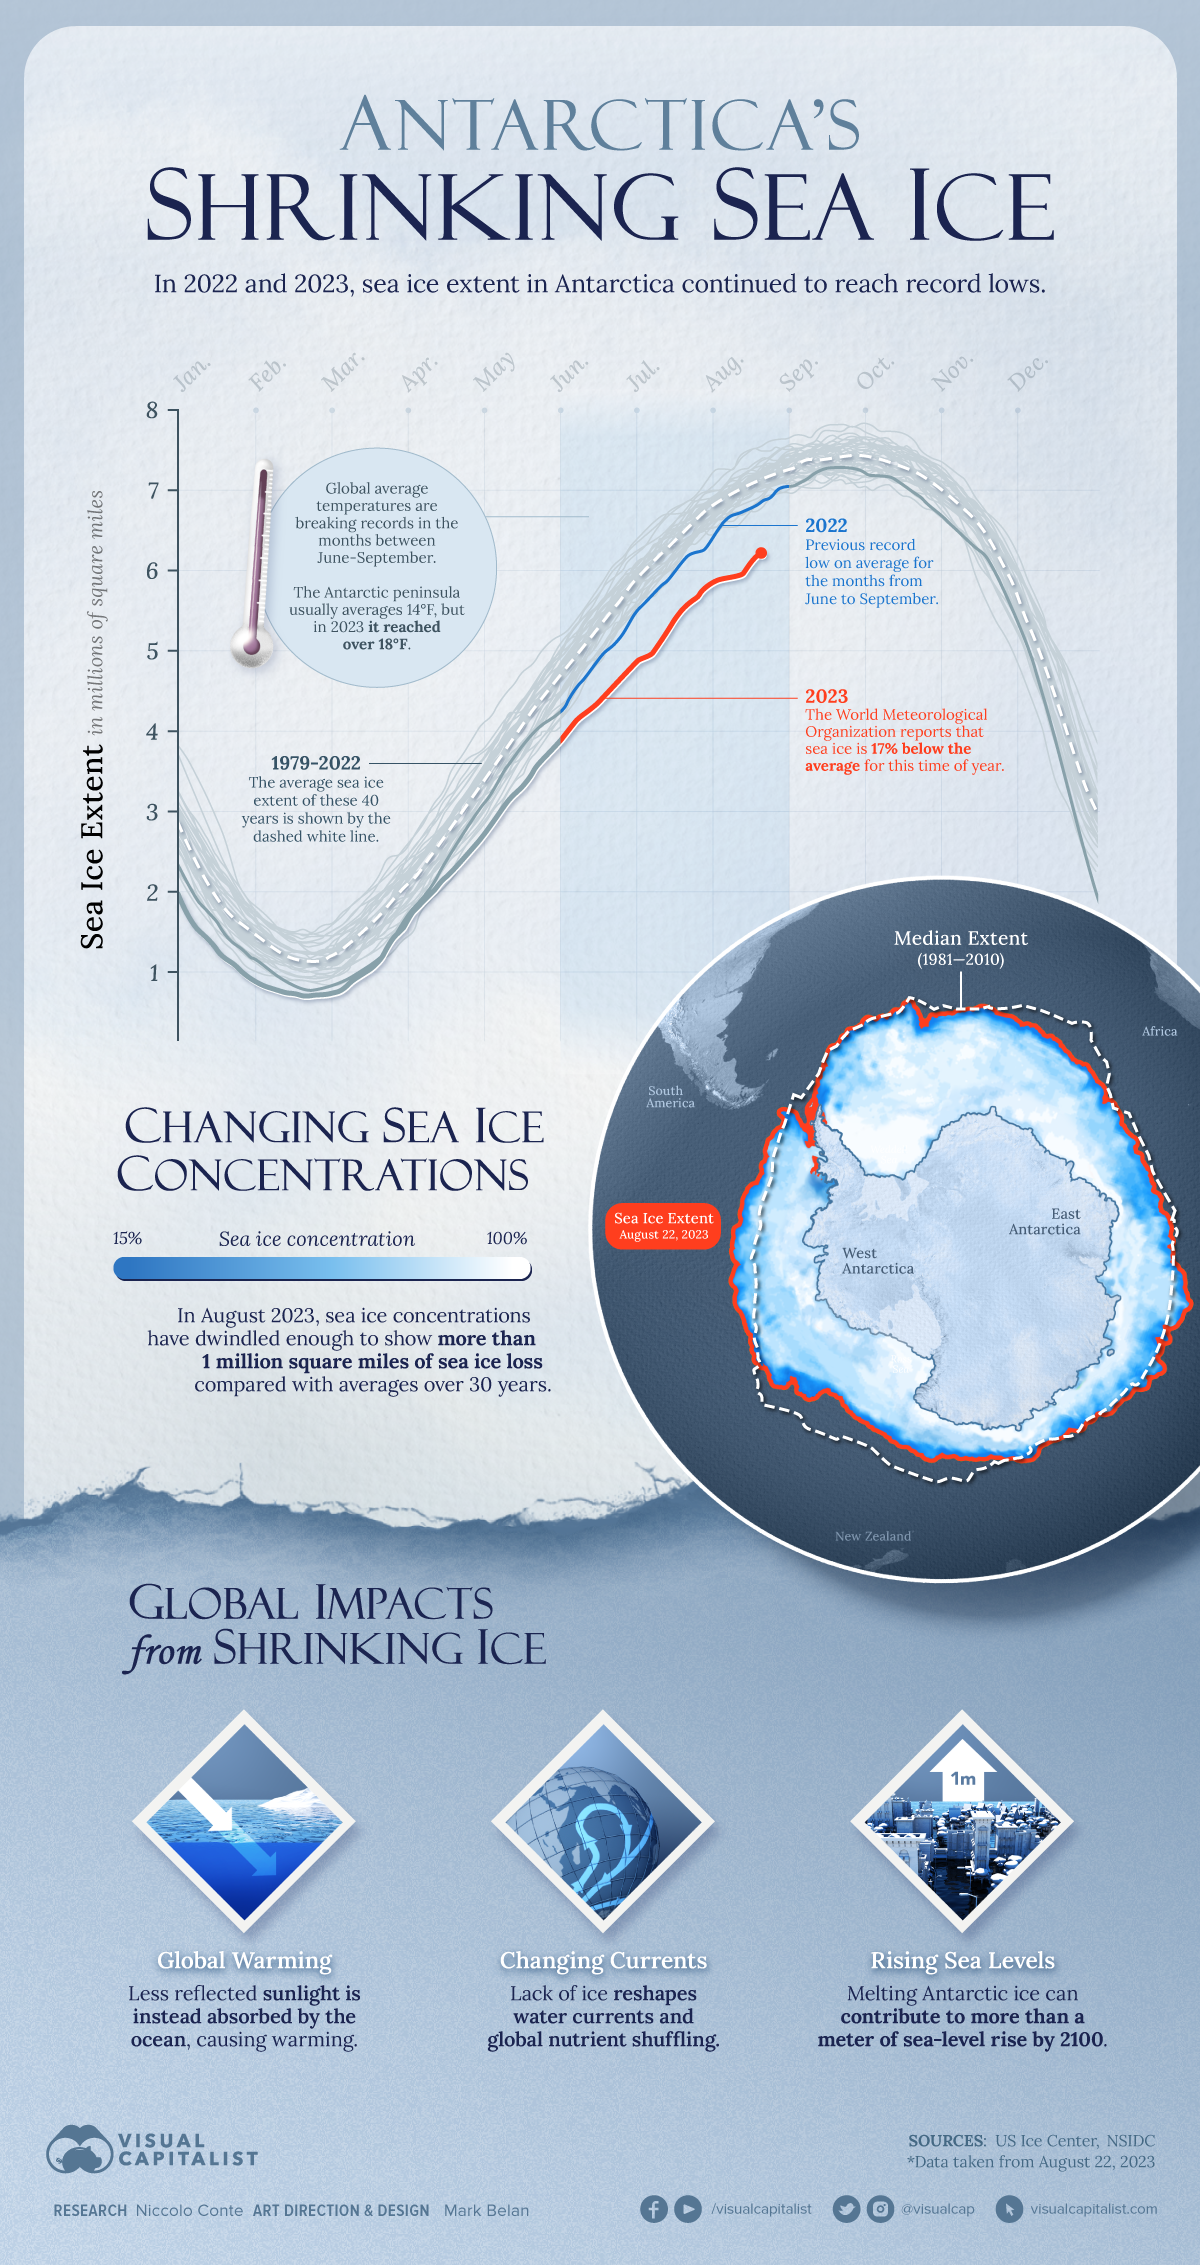 In 2011 and 2023, sea extent in Antarctica continued to reach record lows.